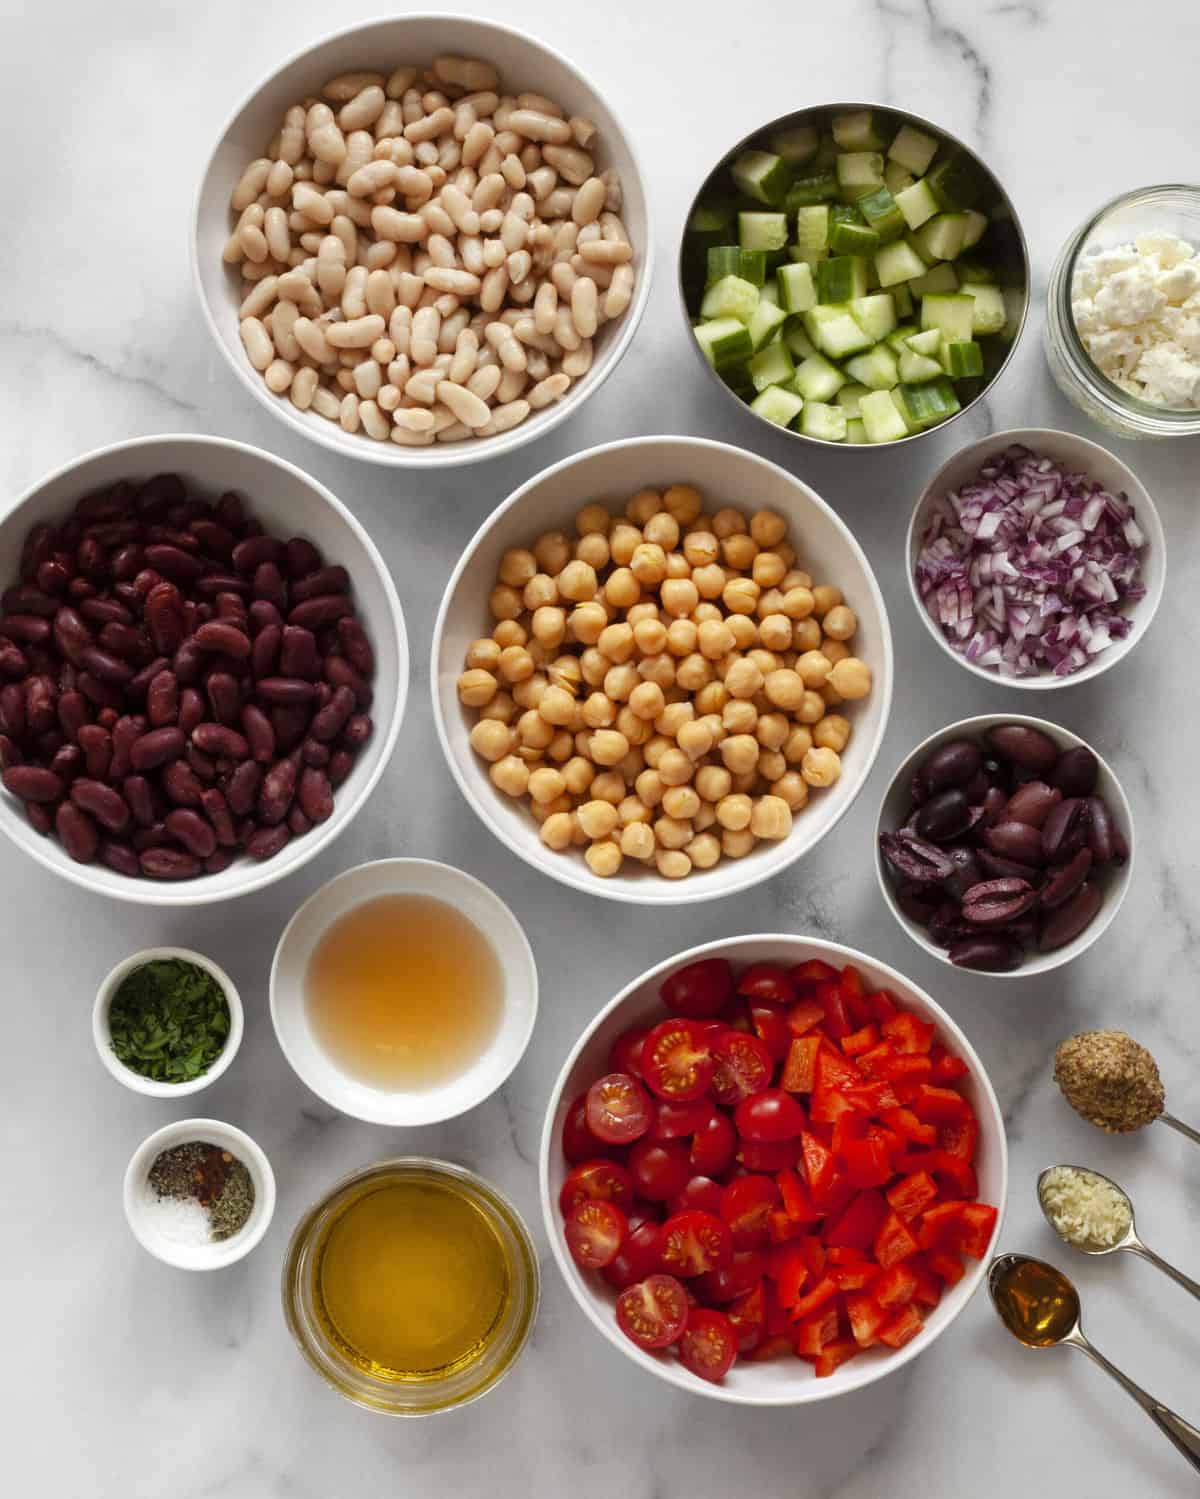 Ingredients including cannellini beans, kidney beans, chickpeas, red peppers, onions, cucumbers, vinegar, oil, spices, parsley and feta.